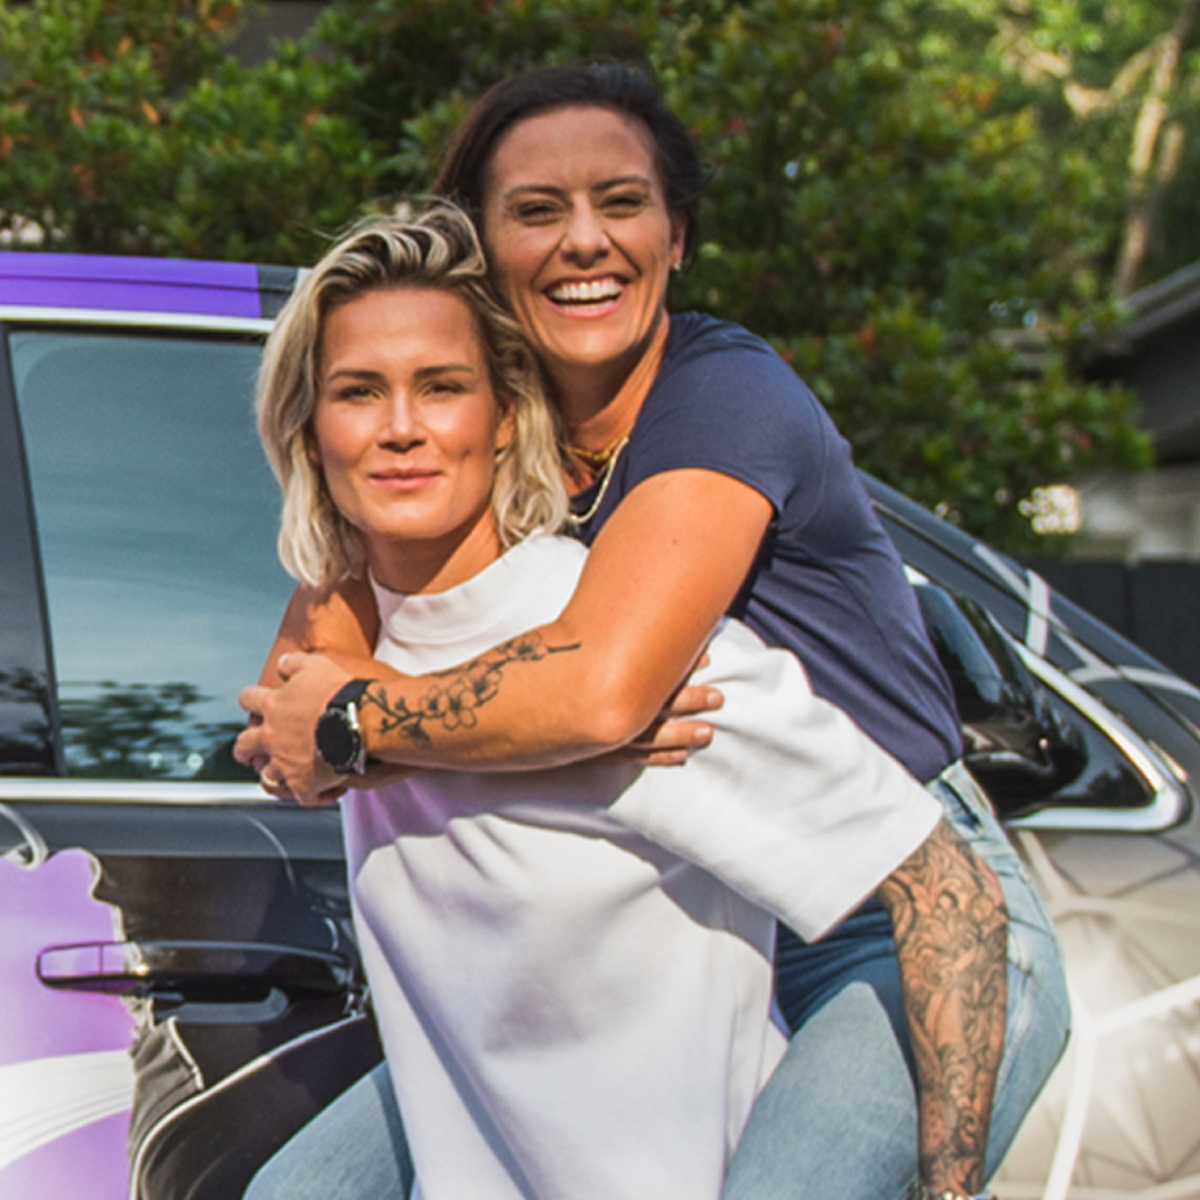 Ali Krieger And Ashlyn Harris Are Redefining The Soccer Mom Stereotype